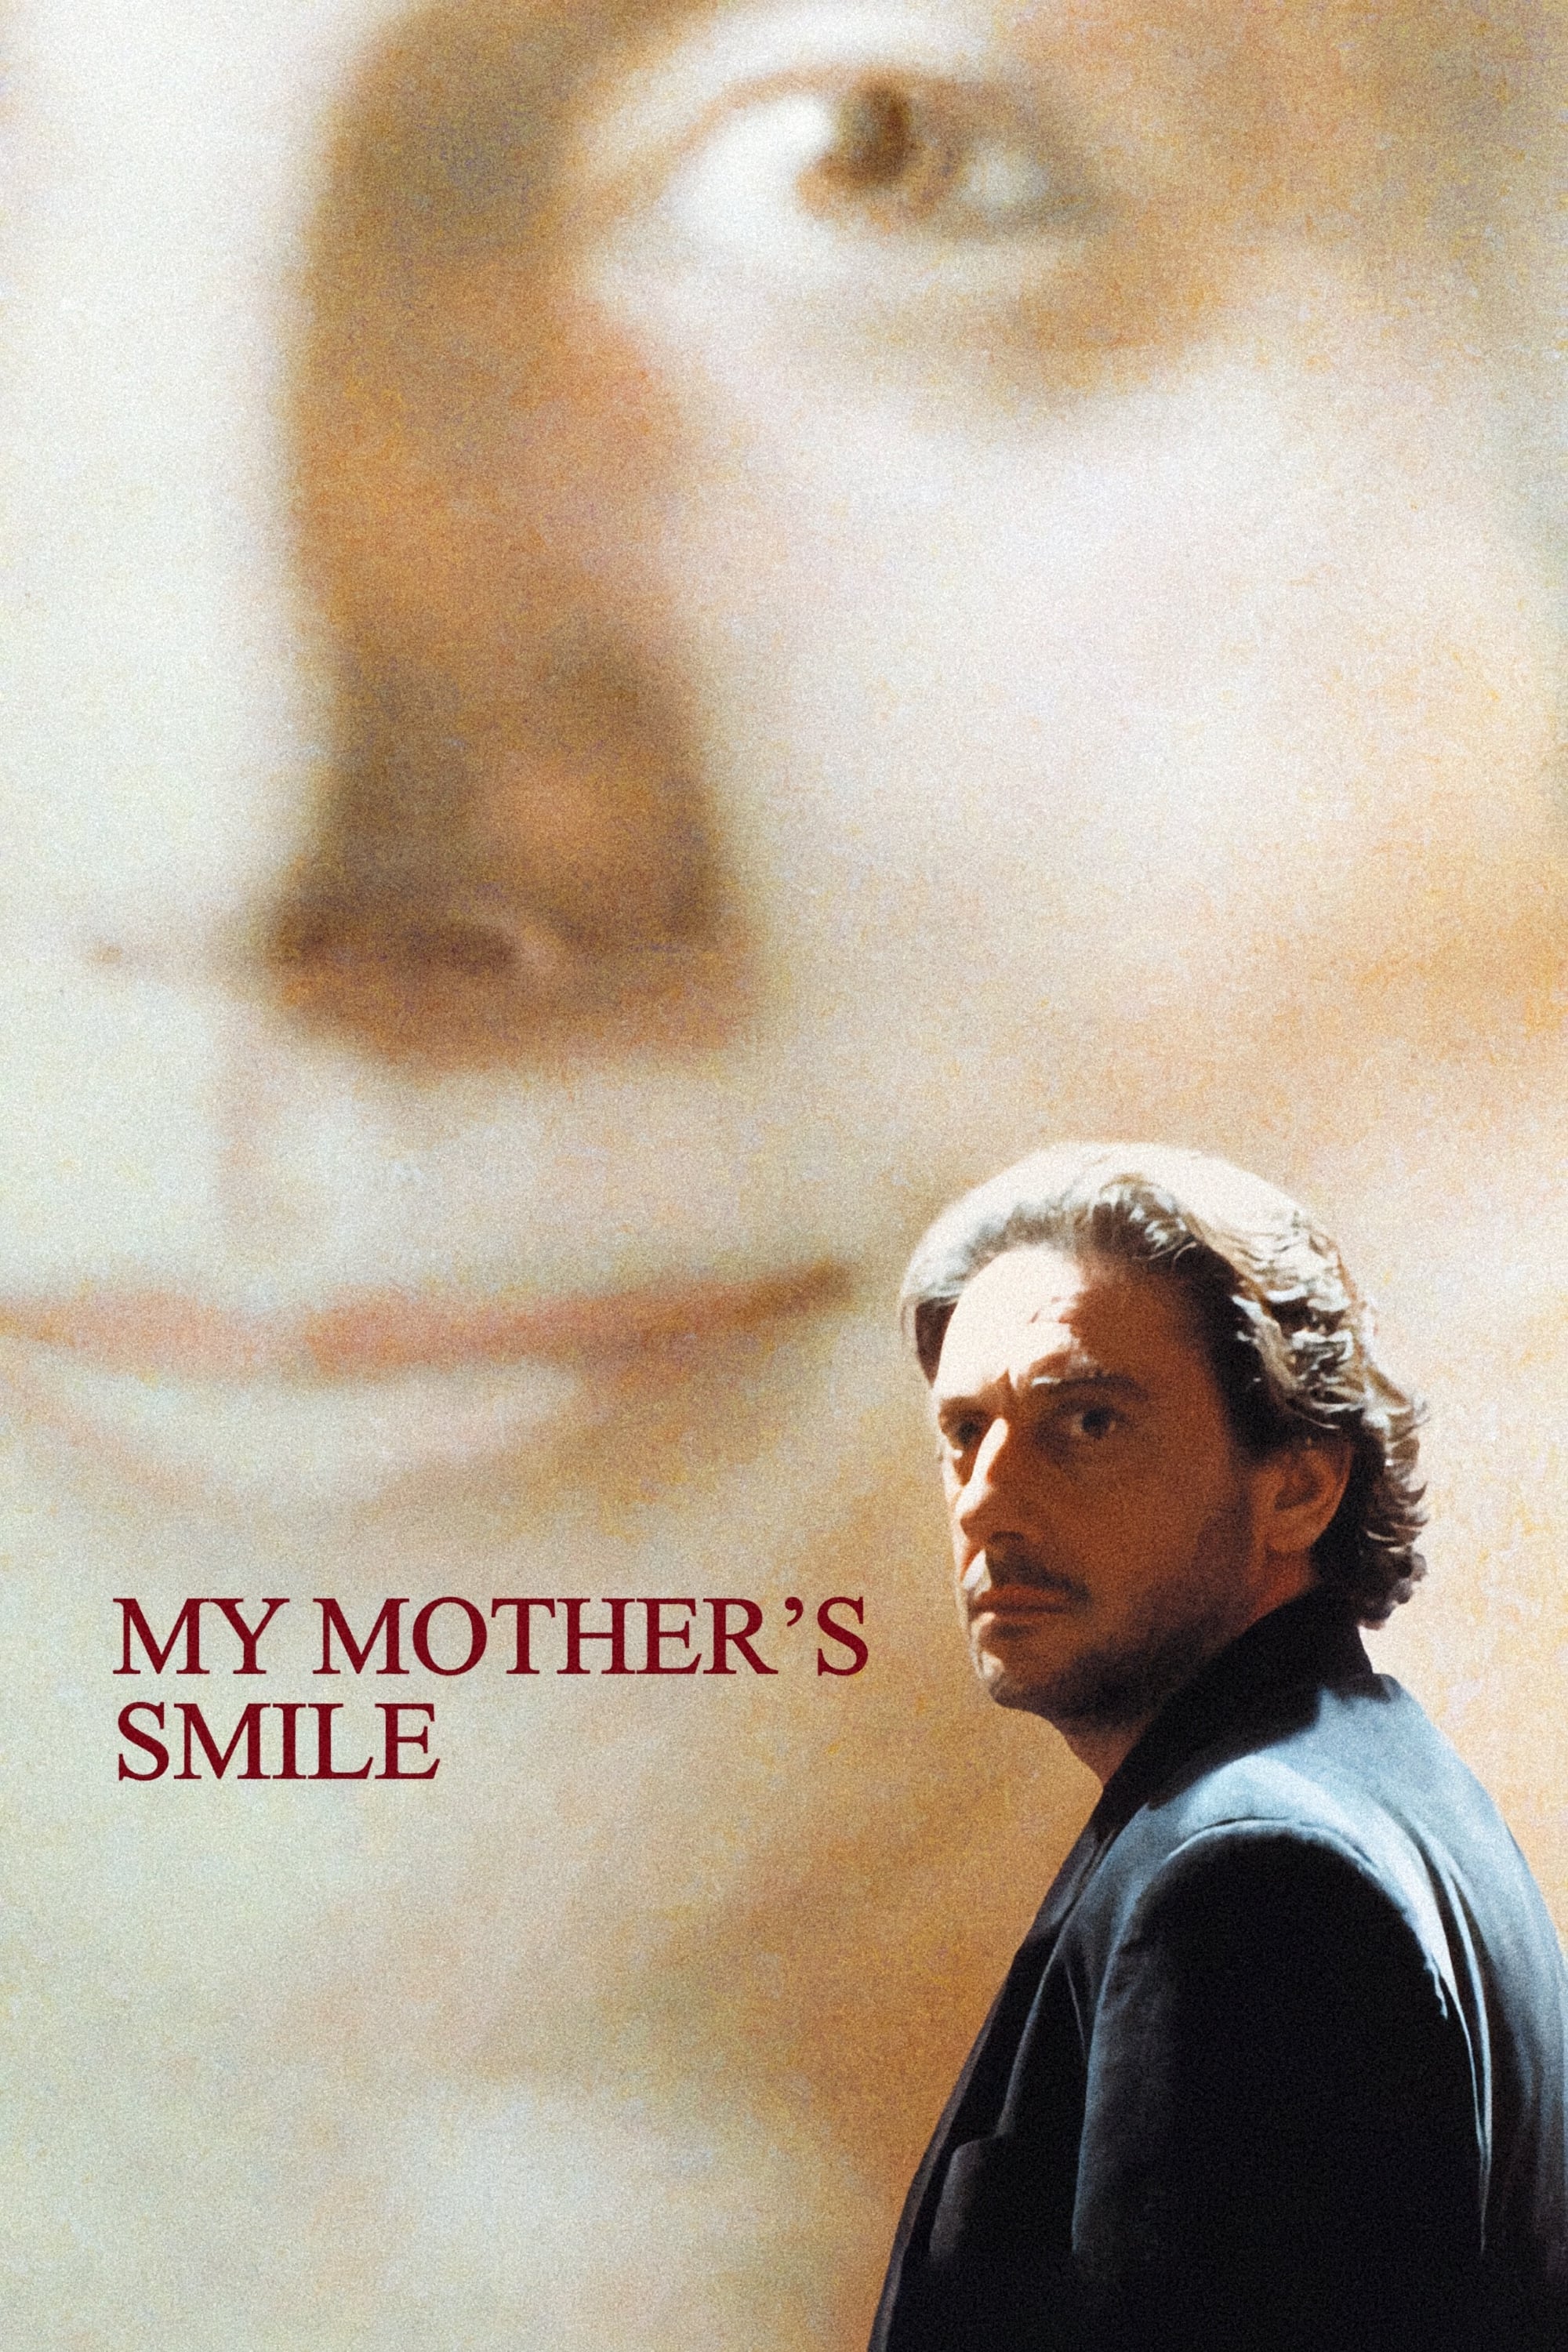 My Mother's Smile